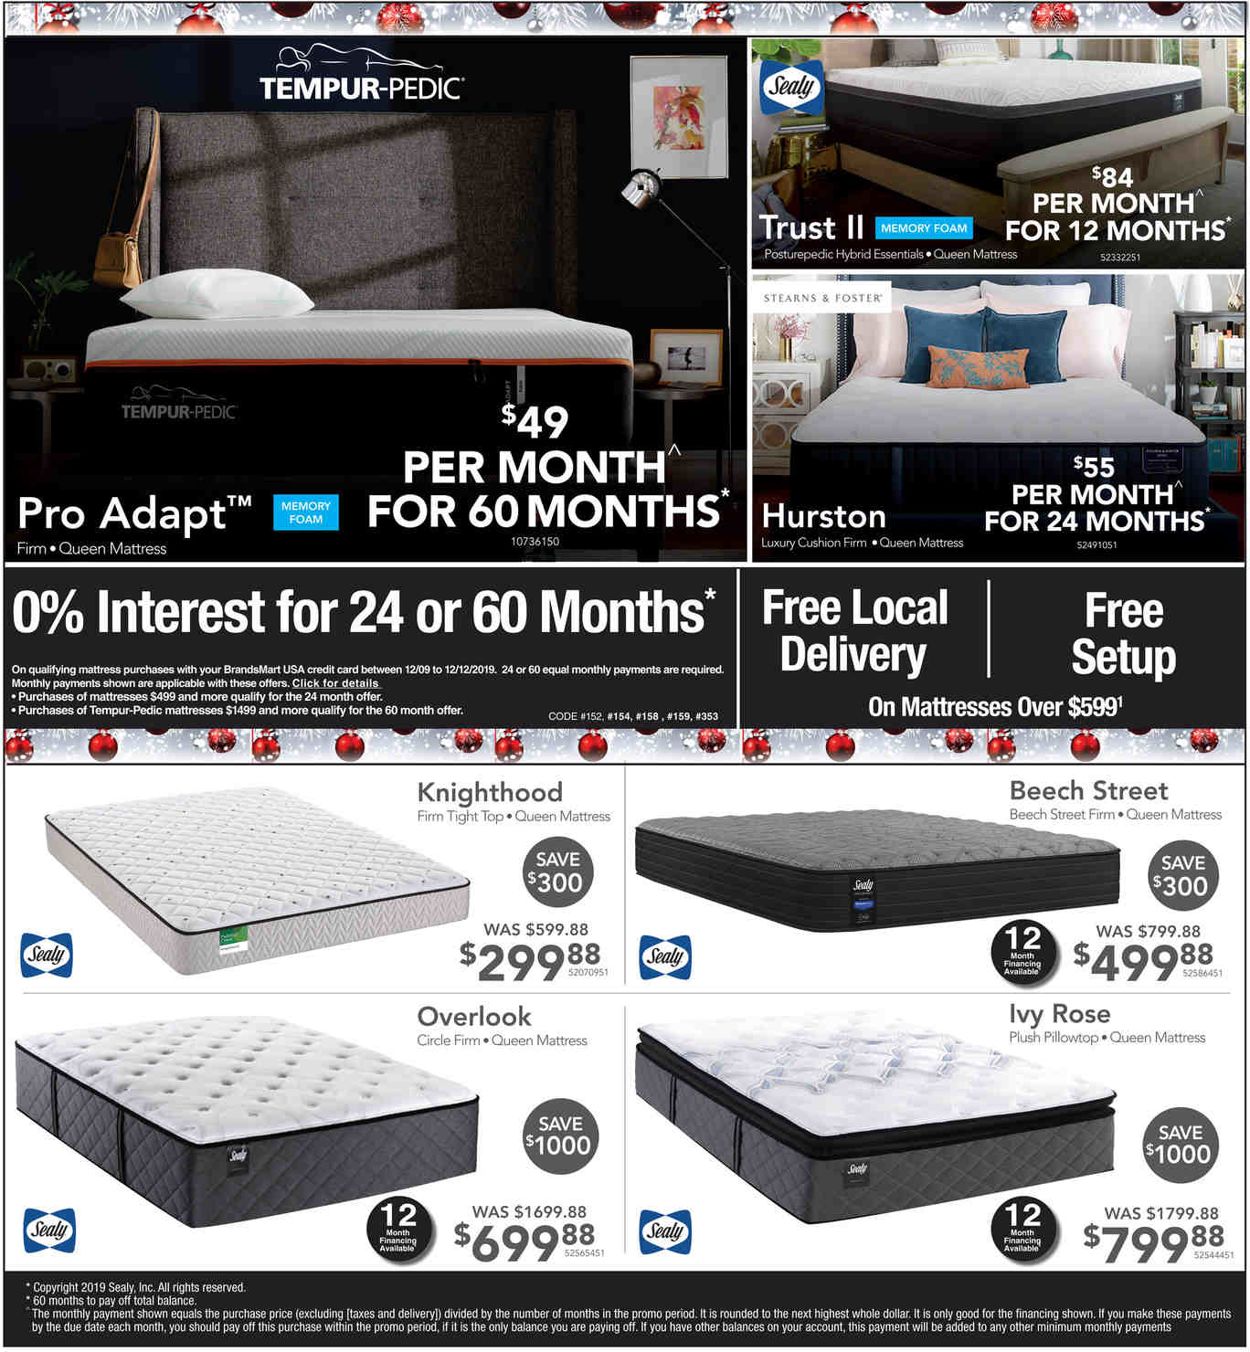 Catalogue Brandsmart USA - Holiday Sale Ad 2019 from 12/09/2019